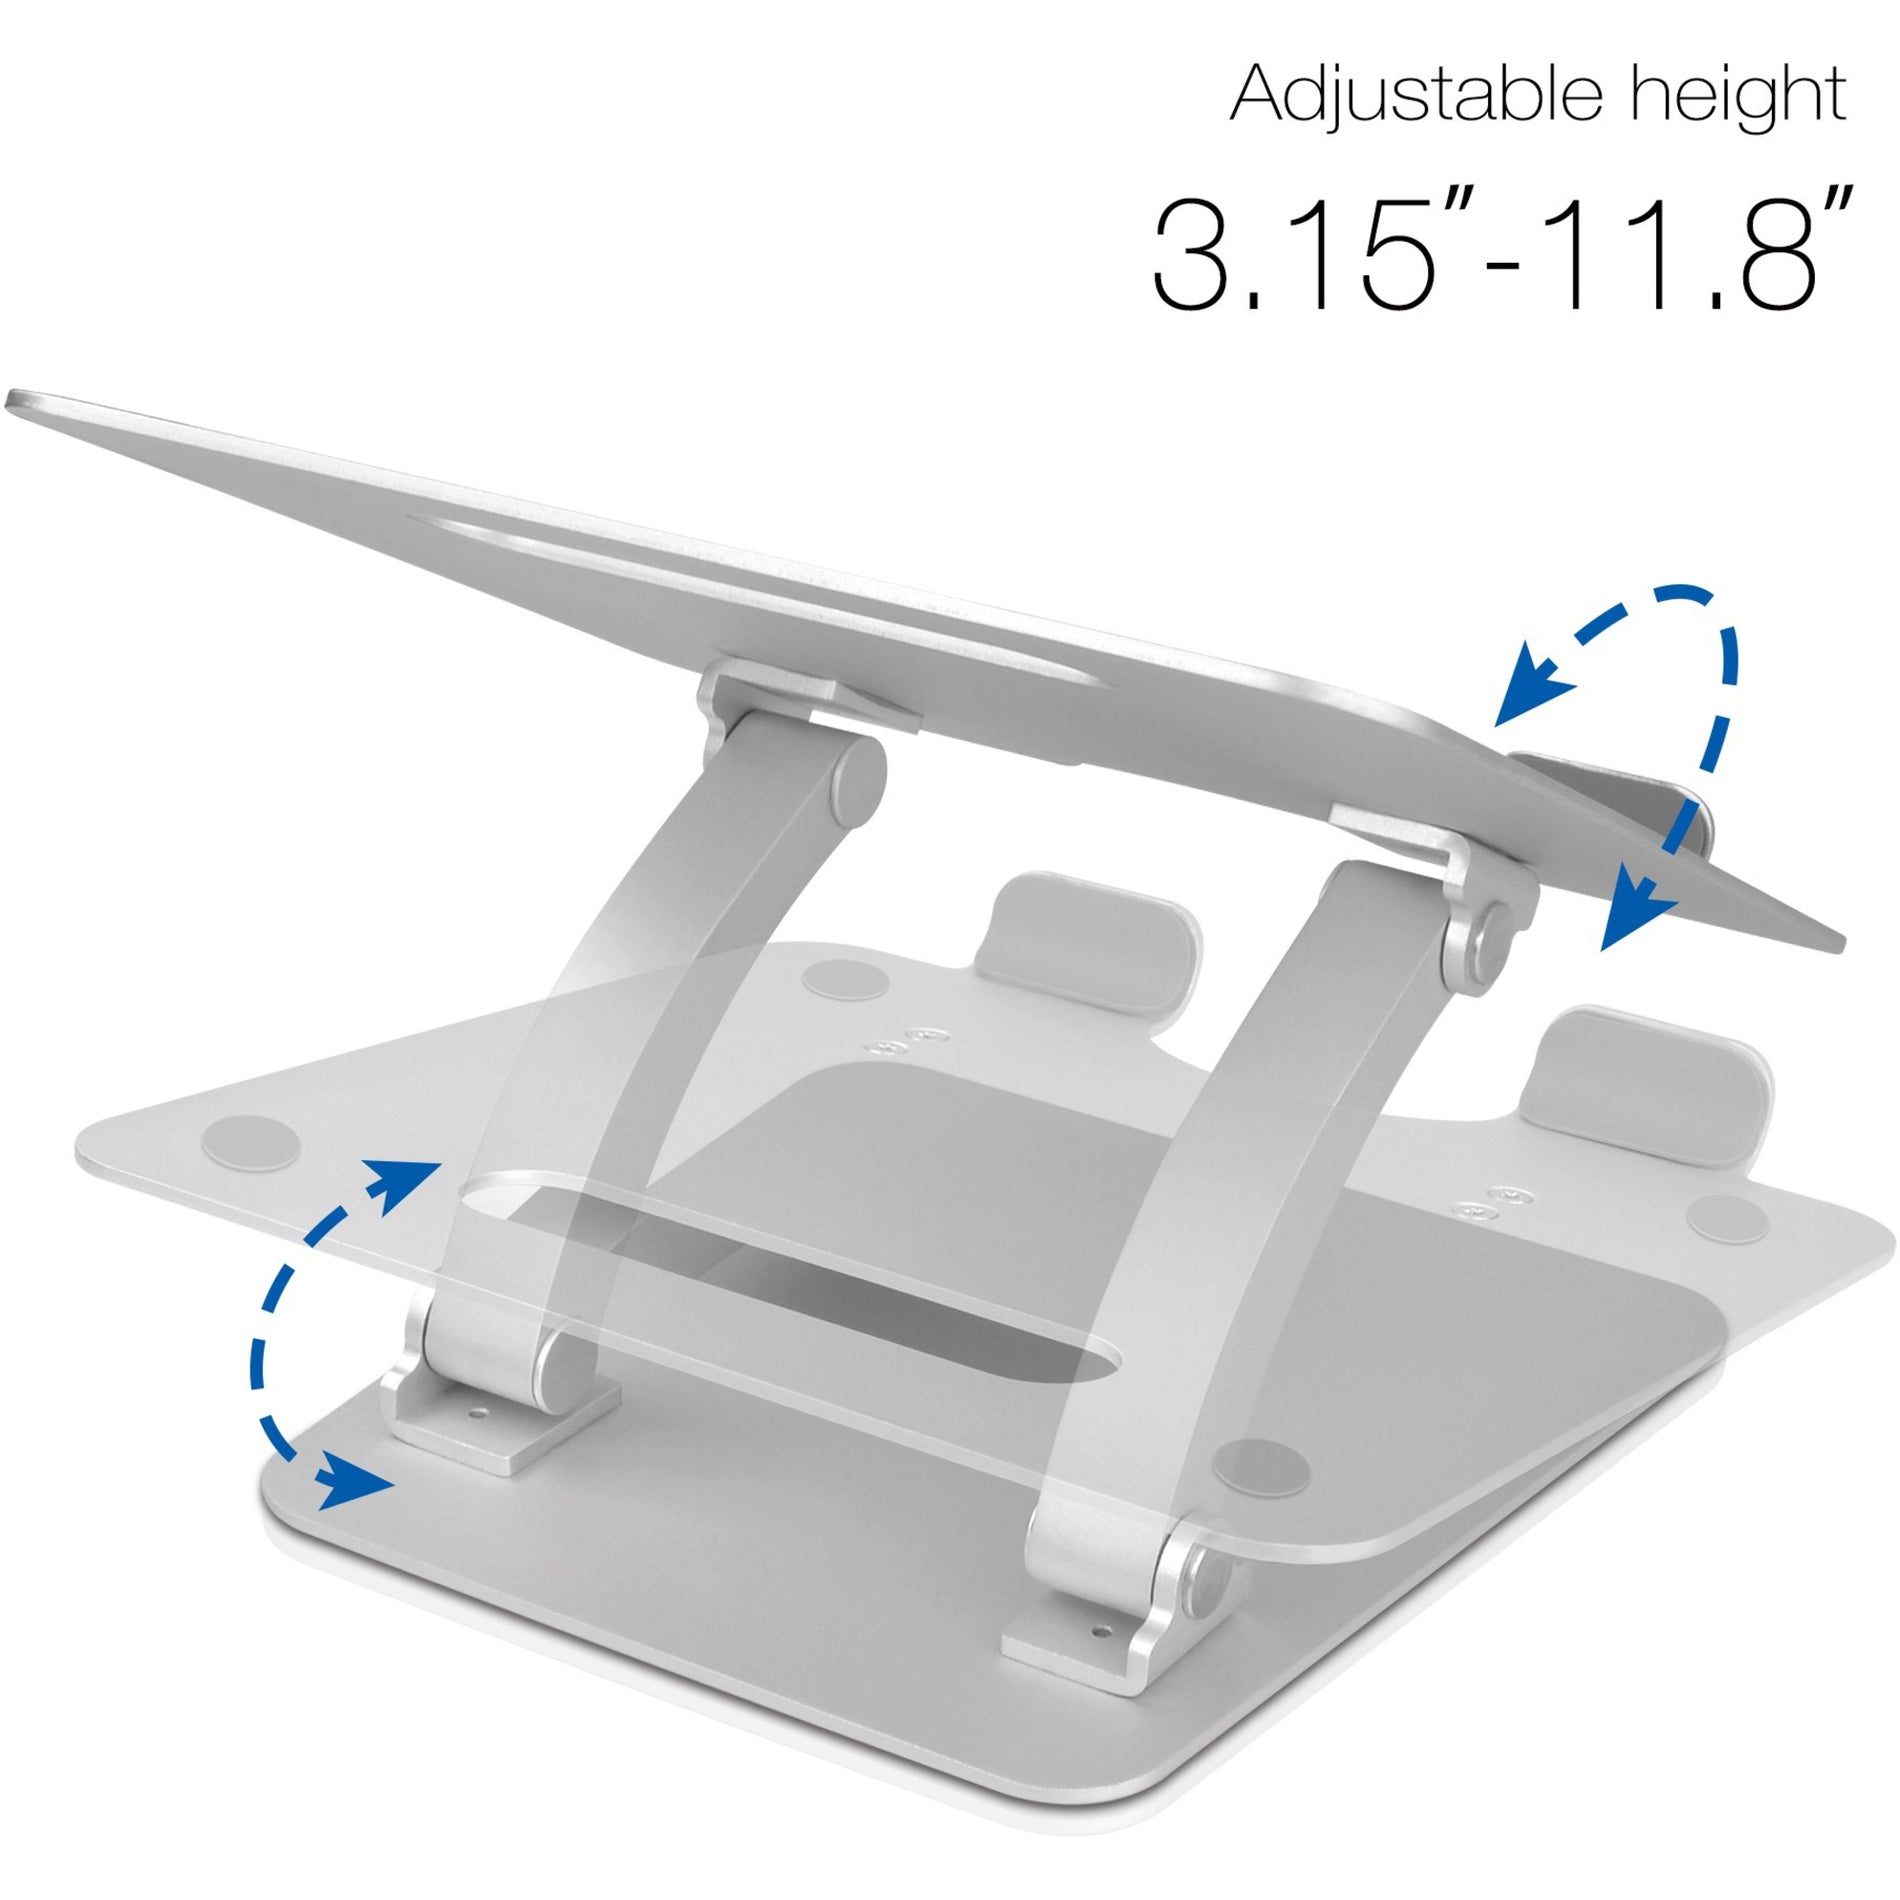 SIIG CE-MT2C12-S1 Adjustable Aluminum Laptop Stand for Macbook and PC, Ergonomic, Ventilated, Durable, Padded, Adjustable Tilt